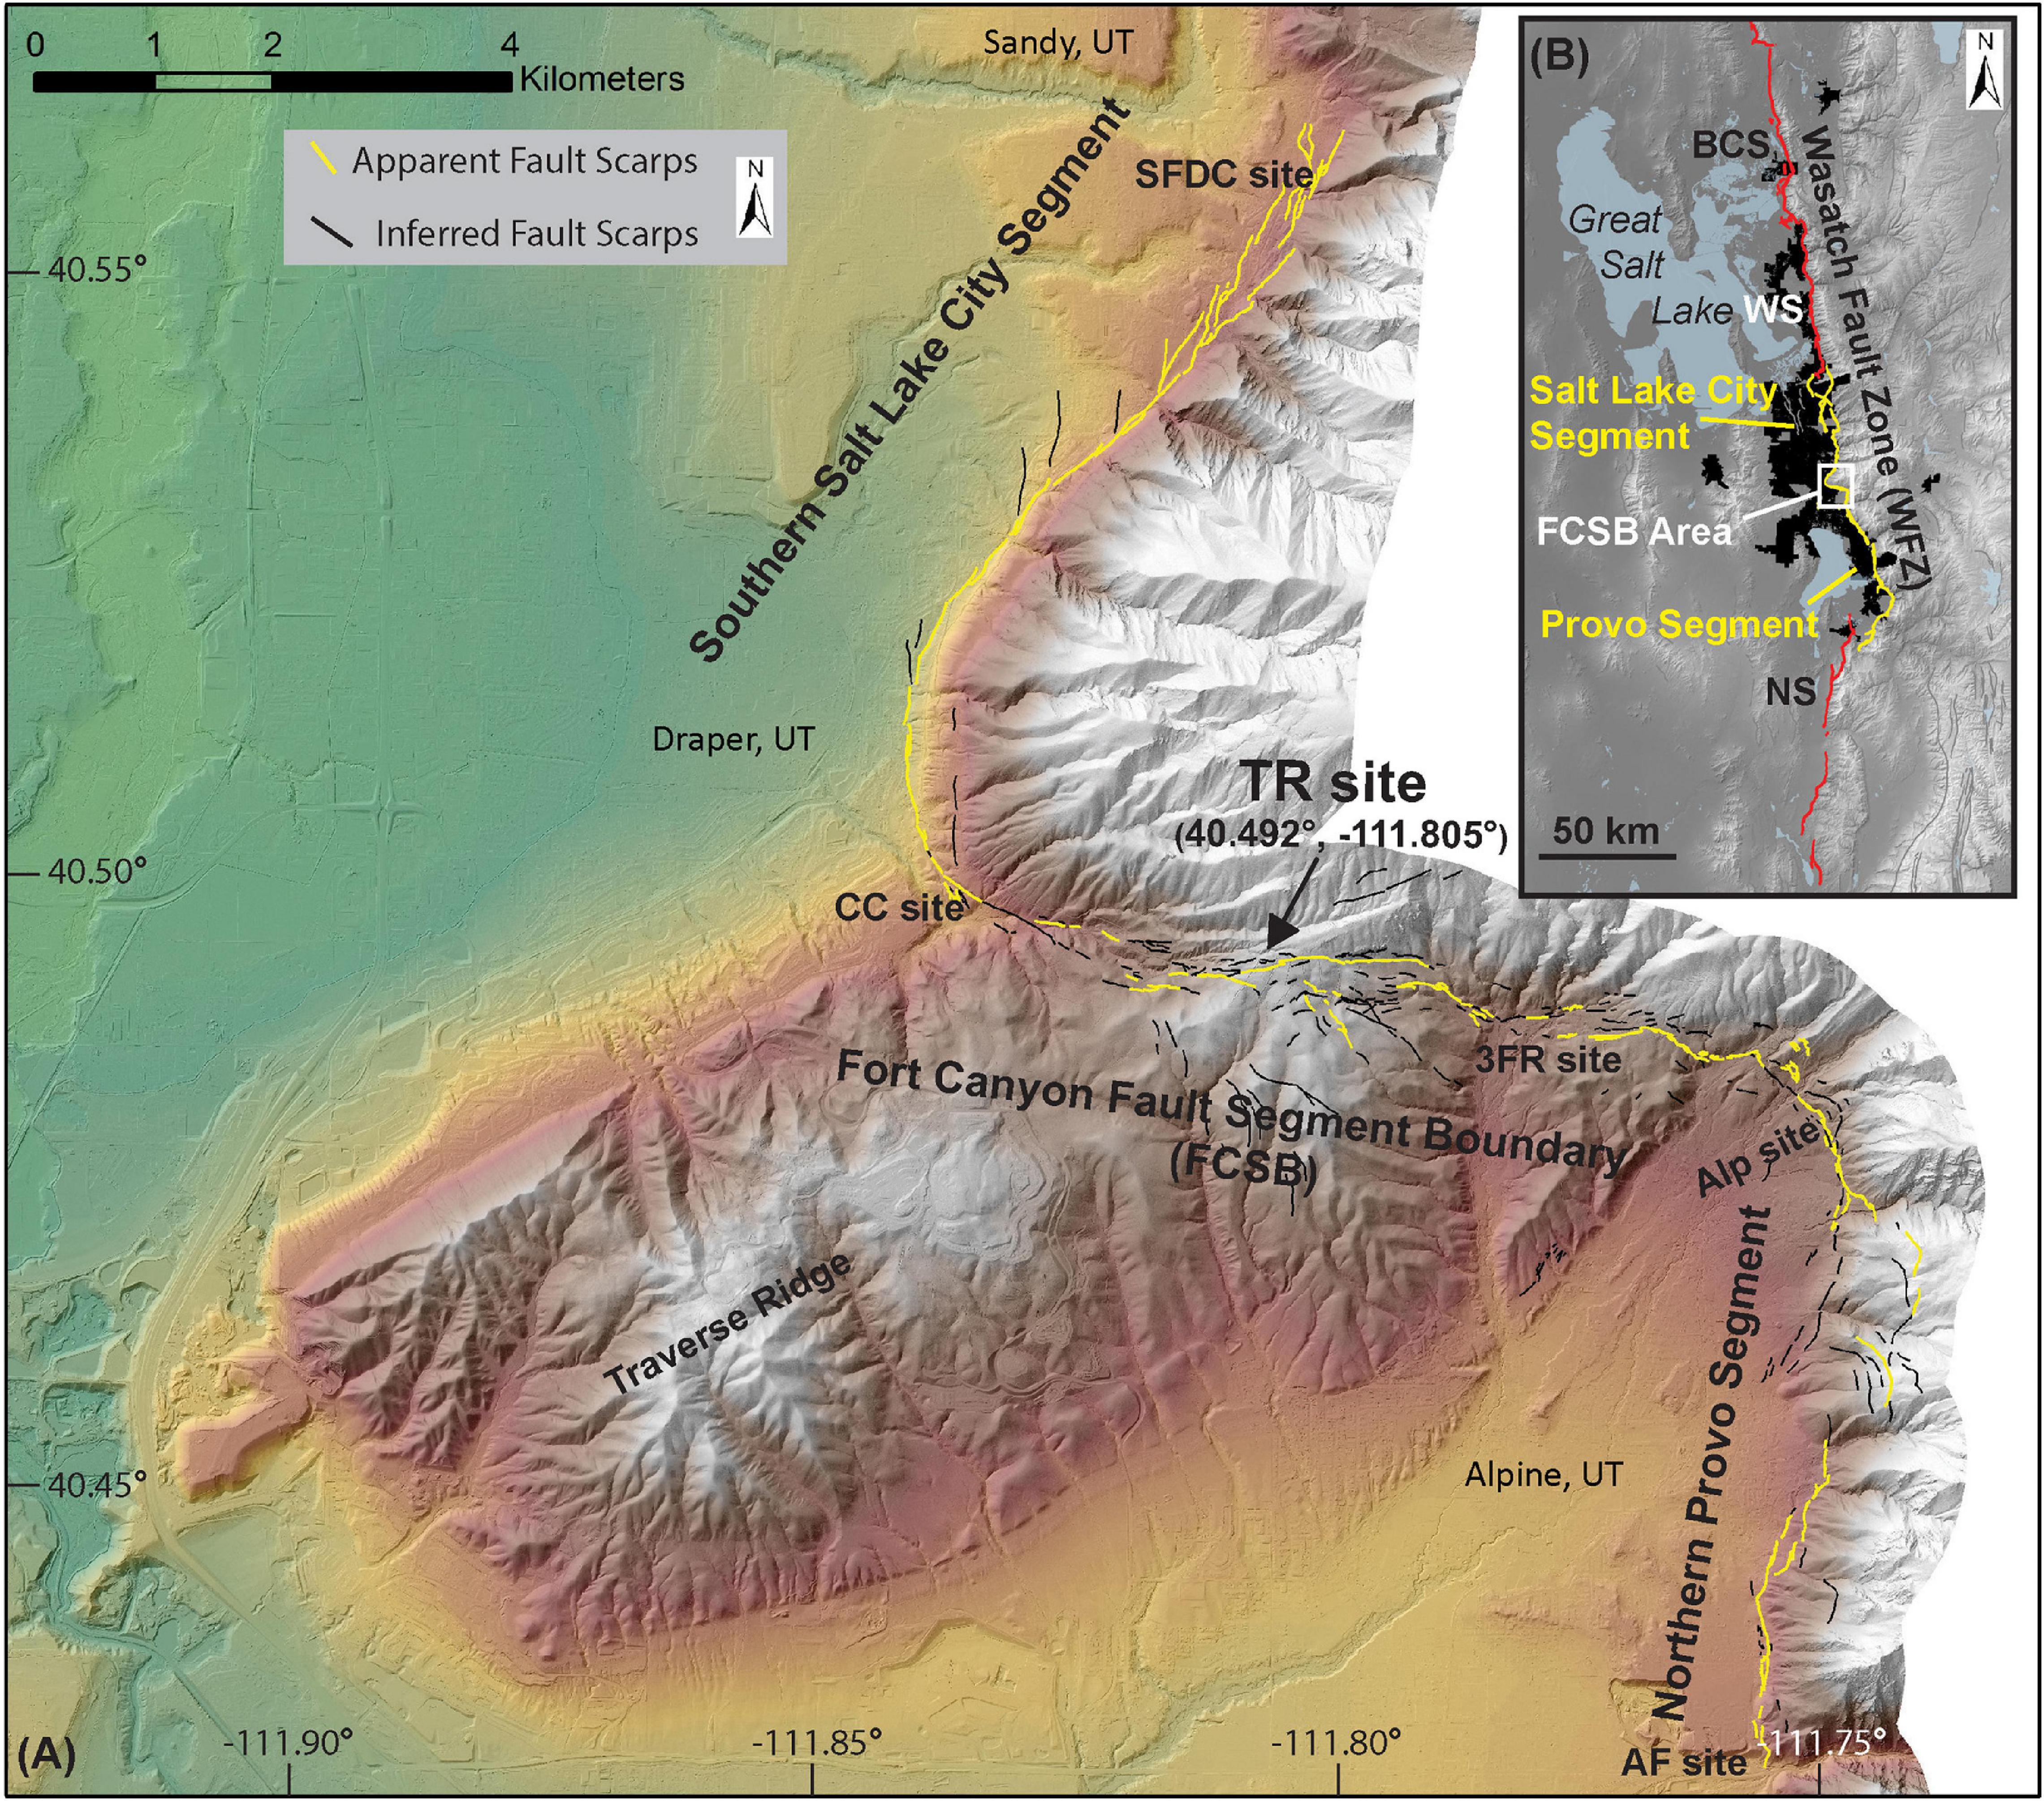 Frontiers The Traverse Ridge Paleoseismic Site And Ruptures Crossing The Boundary Between The Provo And Salt Lake City Segments Of The Wasatch Fault Zone Utah United States Earth Science